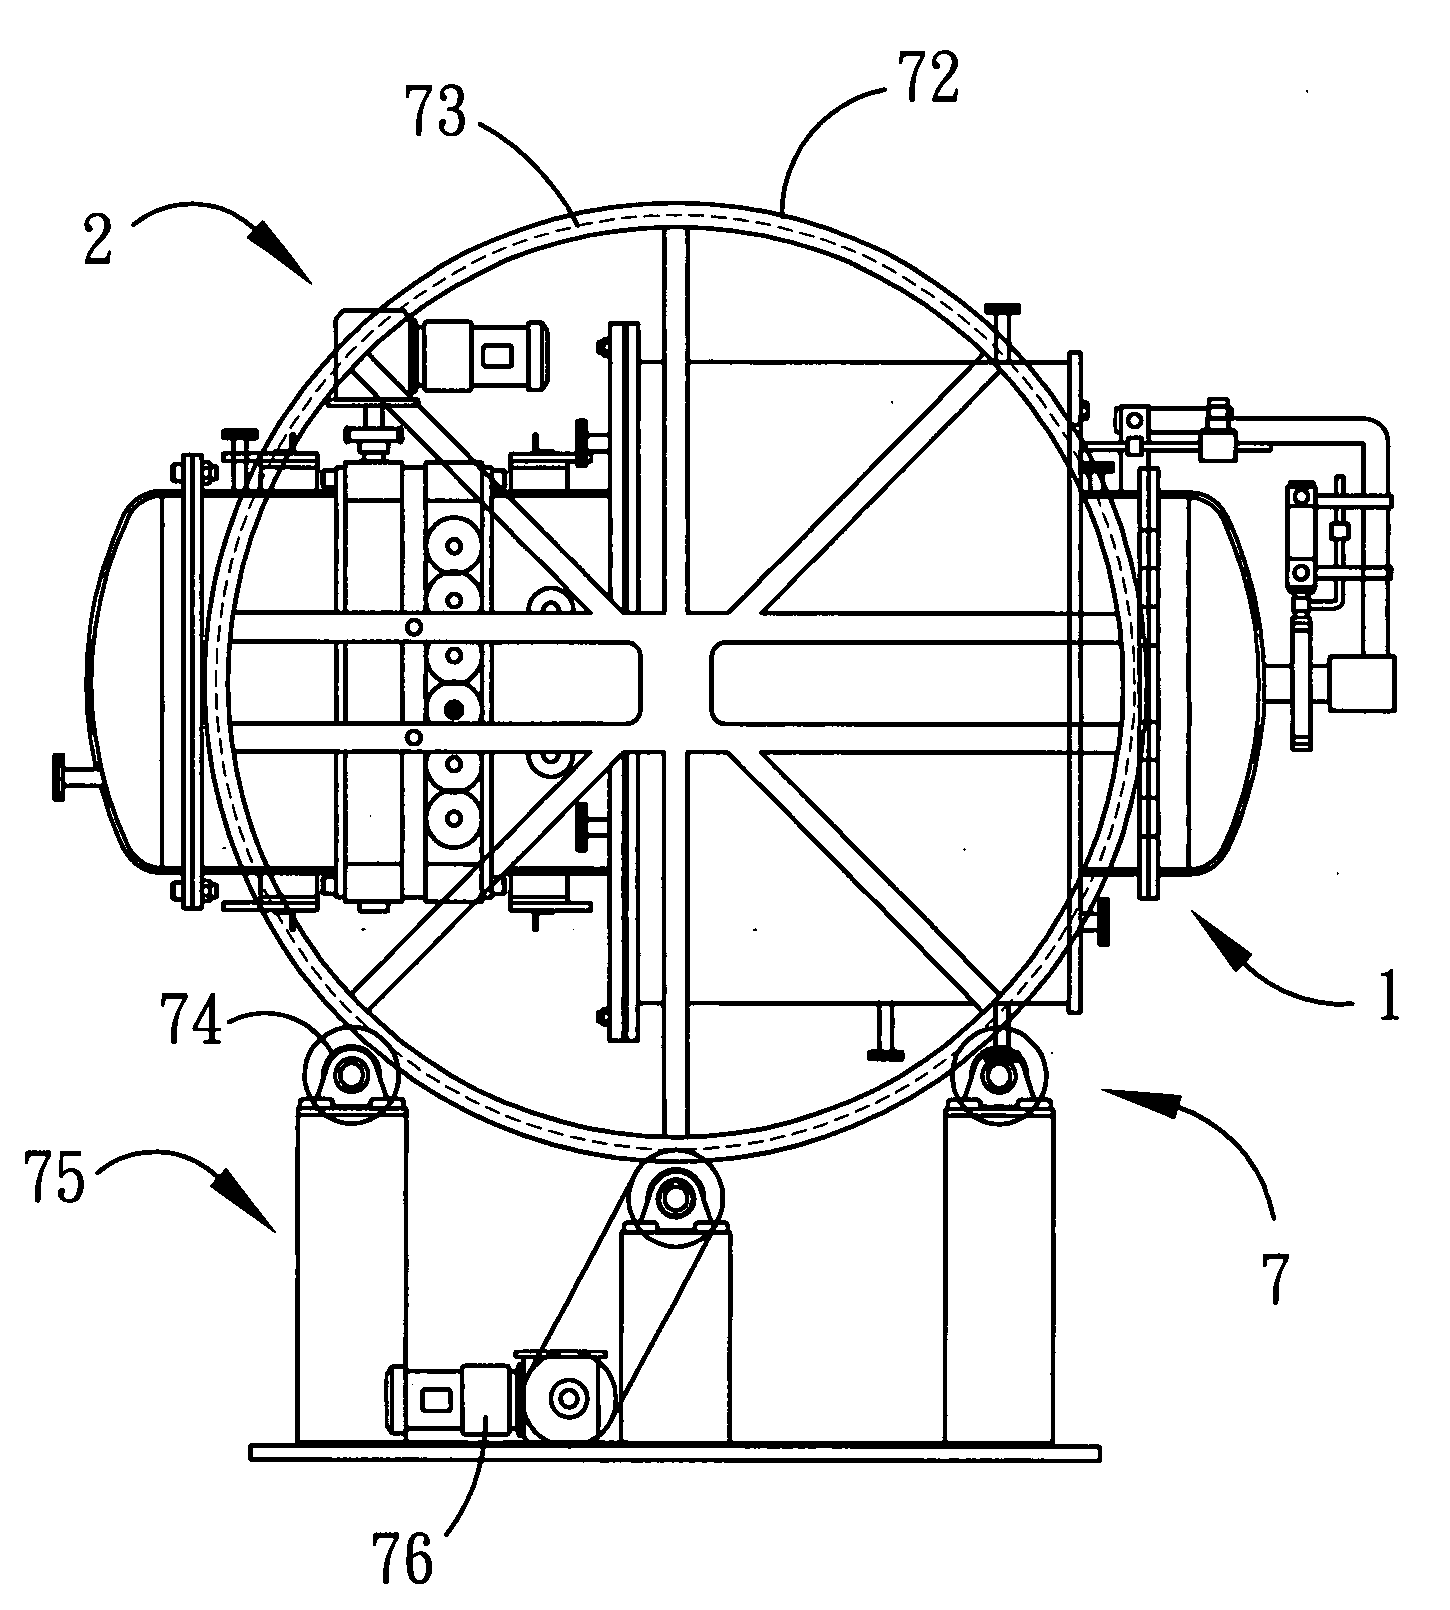 Reciprocating autoclave with internal cutters (RAIC) and method for treatment of medical waste